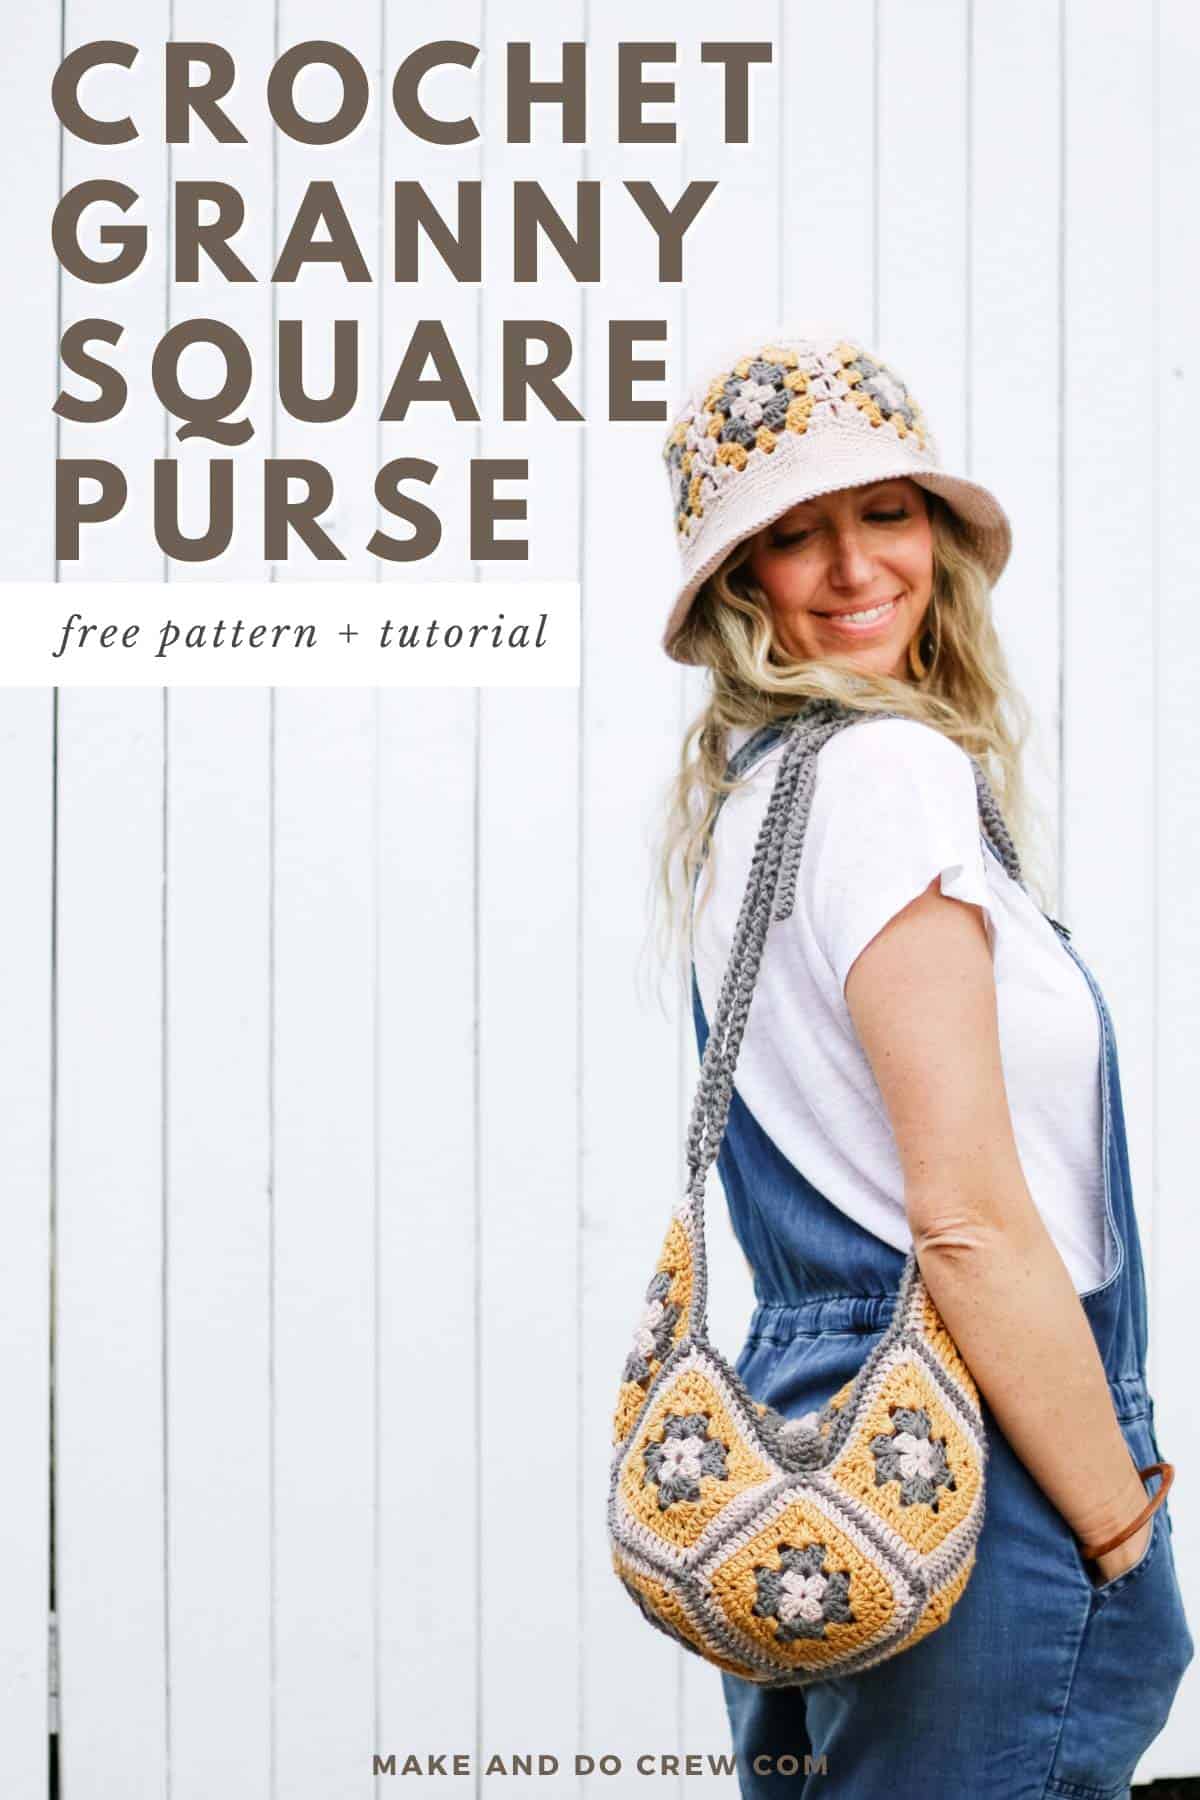 This image shows a woman with blonde hair wearing overalls, a white tee shirt, a crochet granny square hat and a crochet granny square bag. Her hands are in her pockets and she is looking over her right shoulder at the camera.